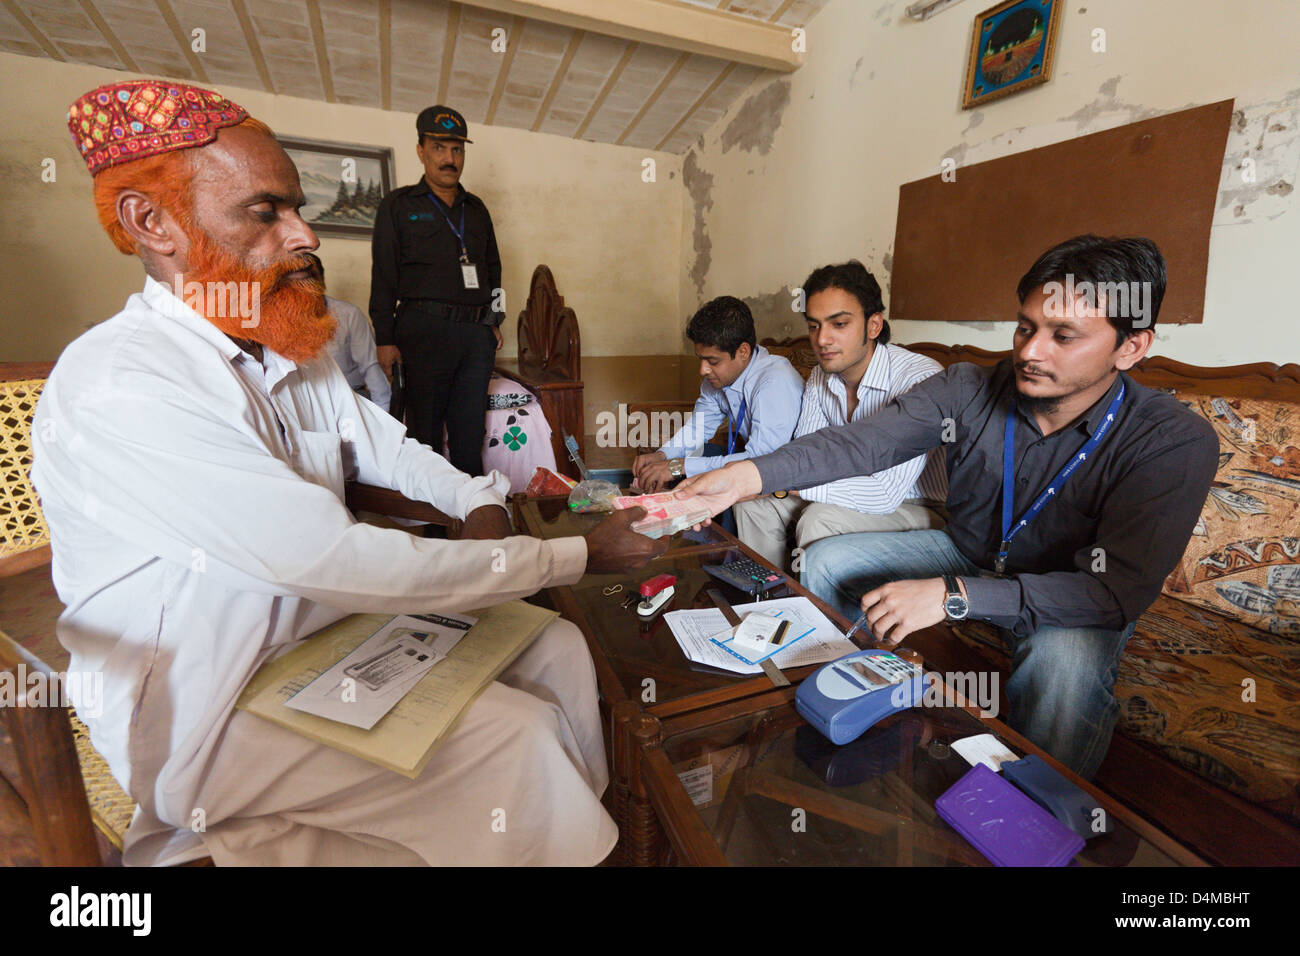 Hamzomahar, Pakistan, Mr. Hafiz takes funds received for its workers Stock Photo